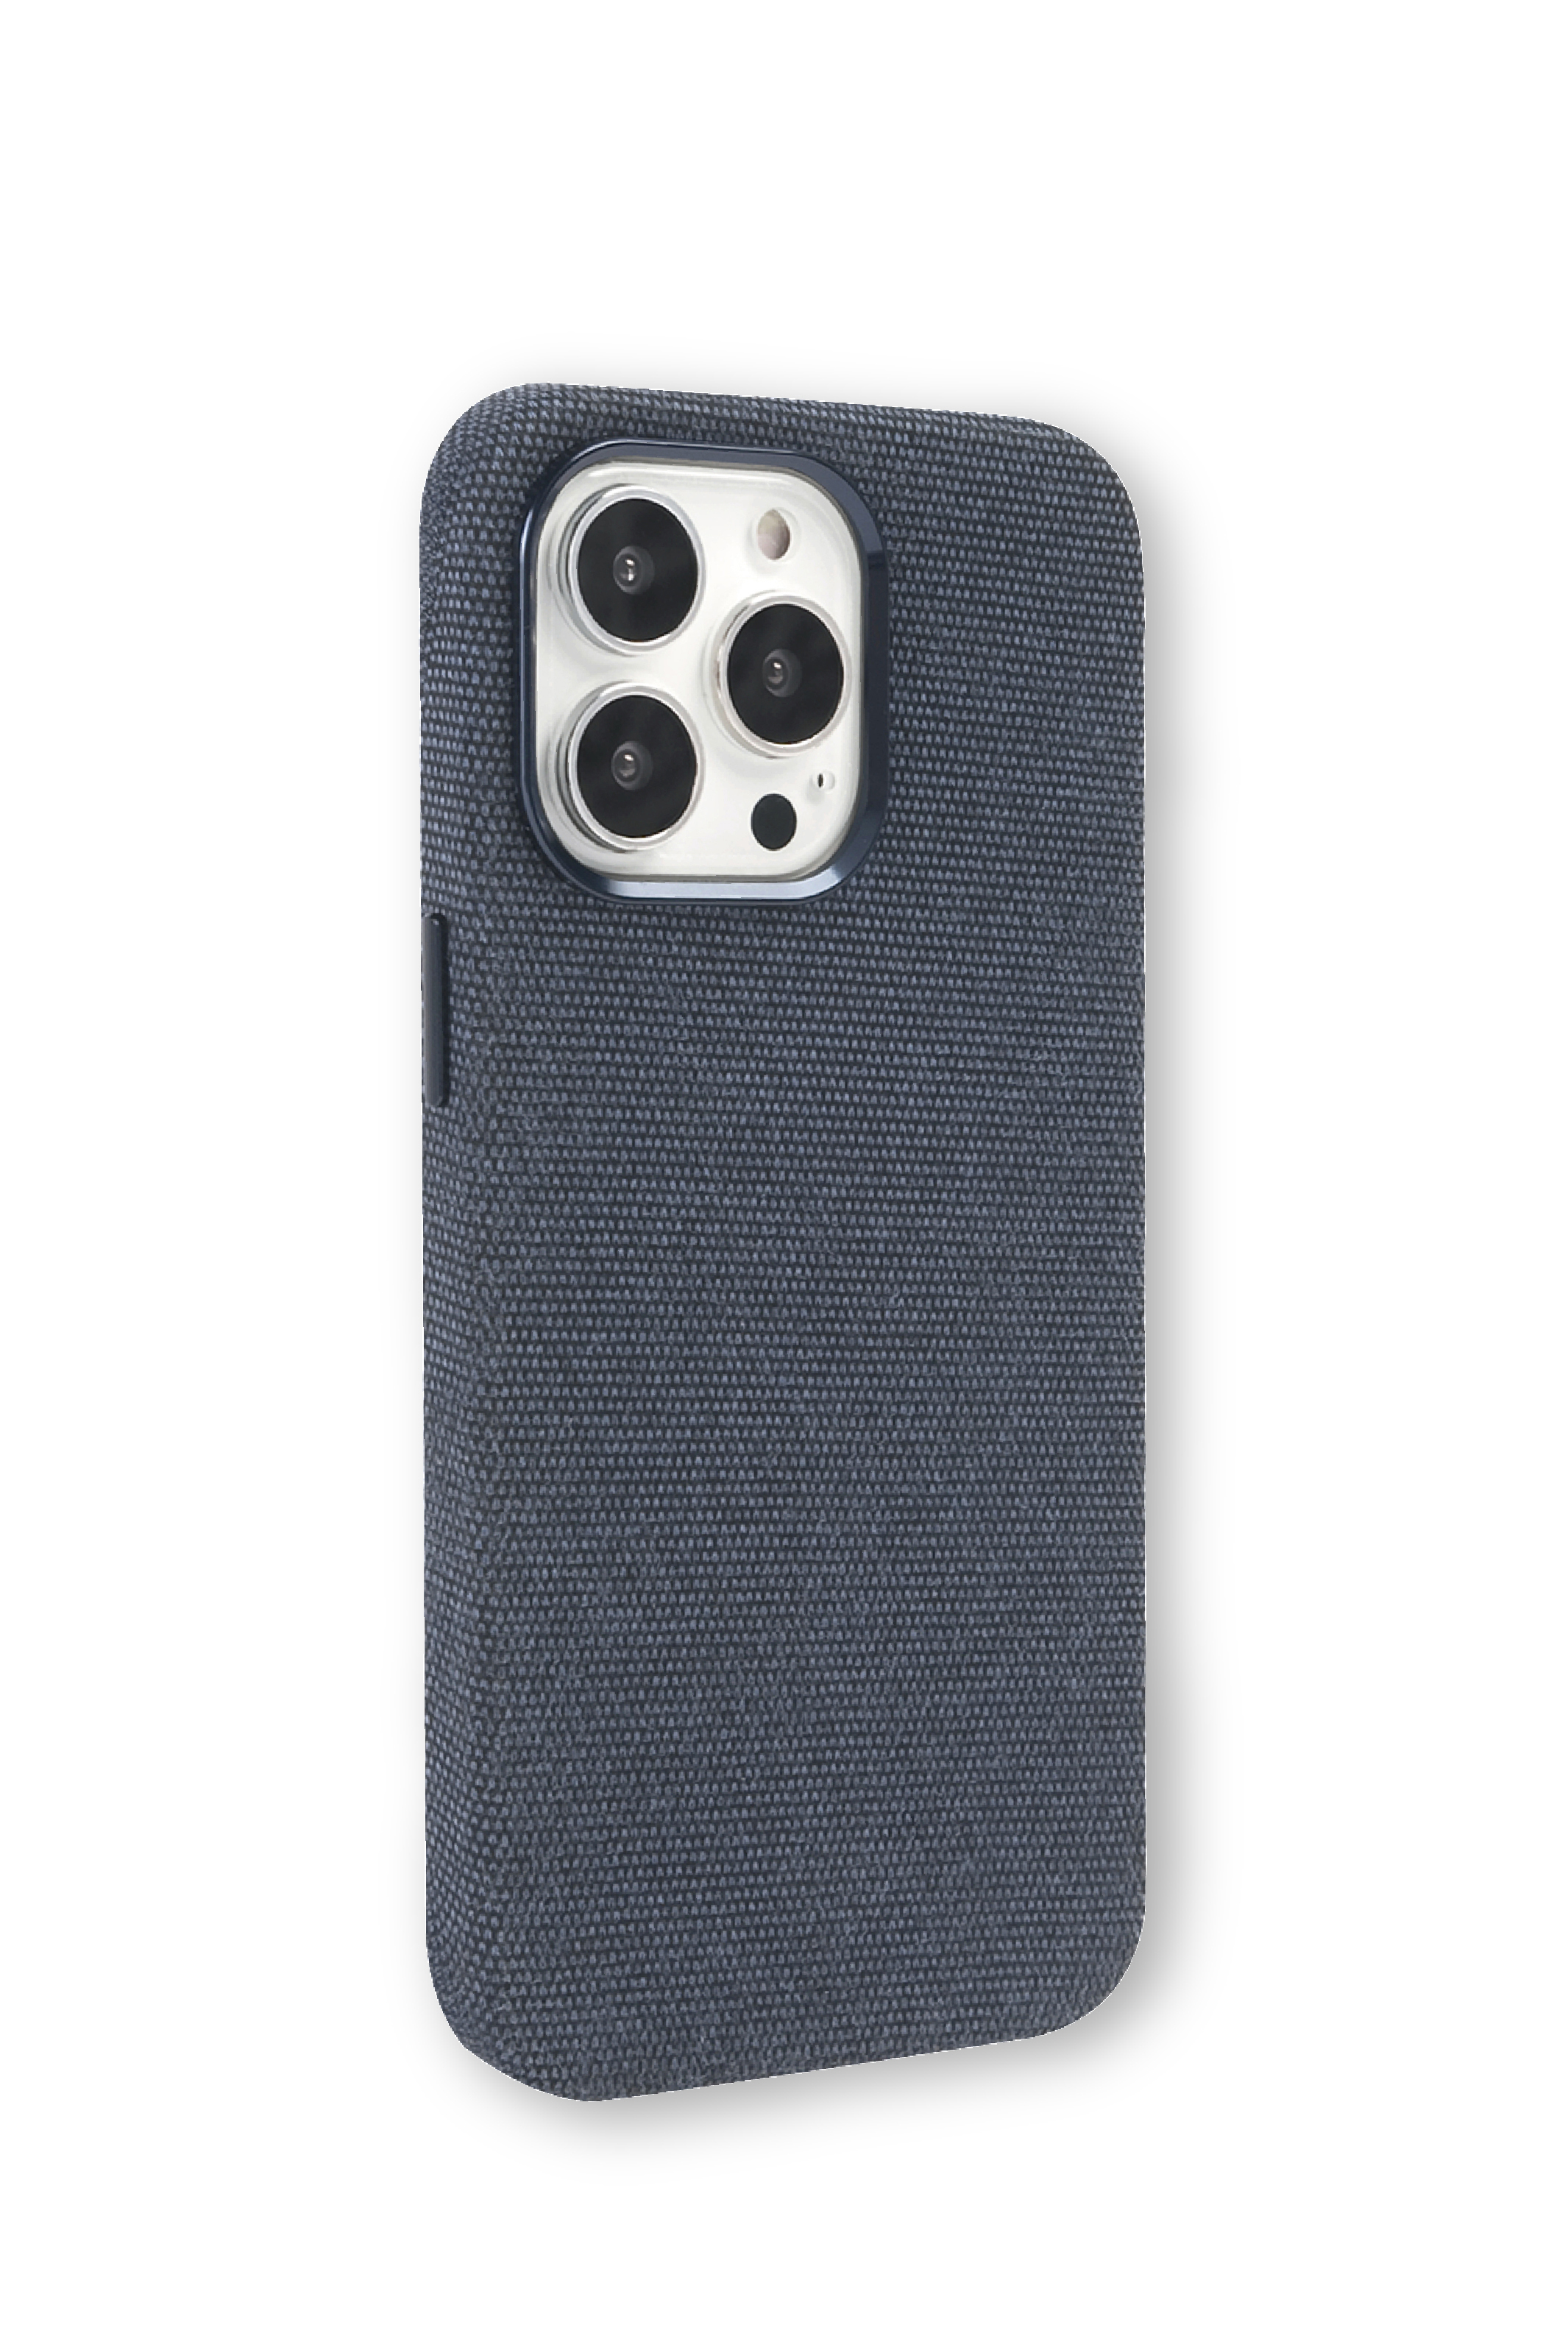 ISY ISC 13 Apple, Pro, iPhone 3617, Backcover, Navy